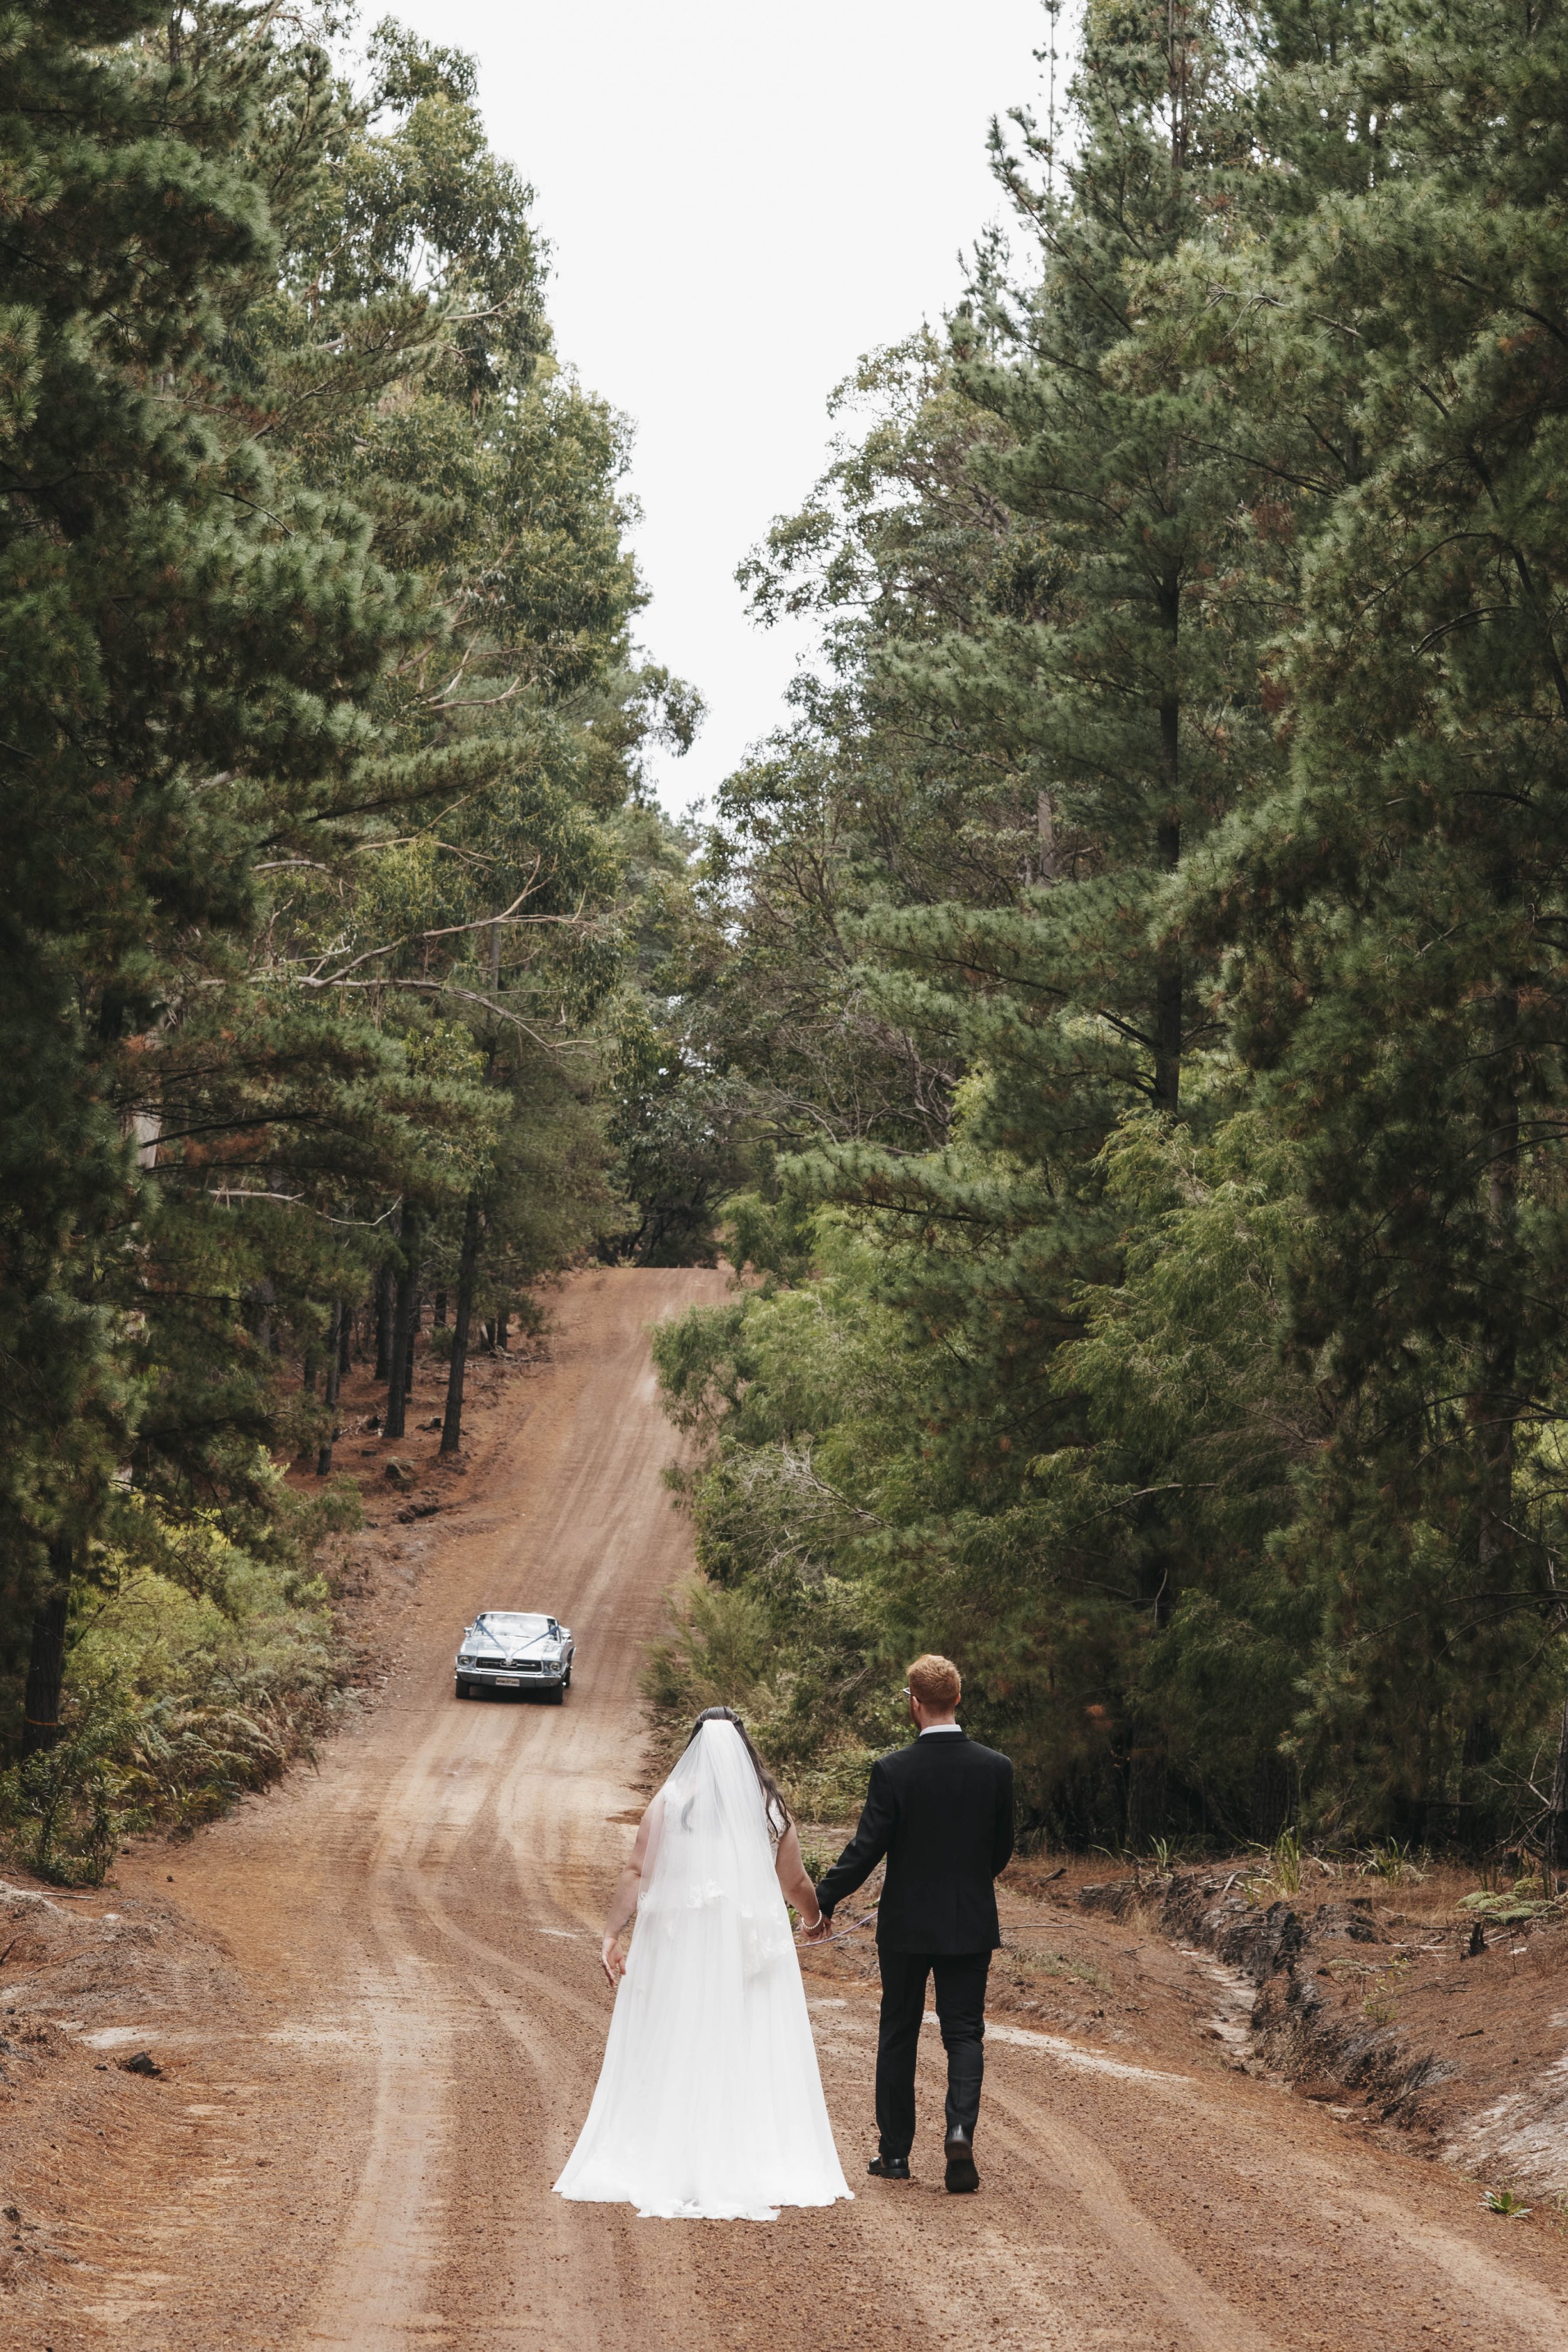 John Rice Photography-wedding-classic car hire-mr mustang hire-south west-margaret river3.jpg